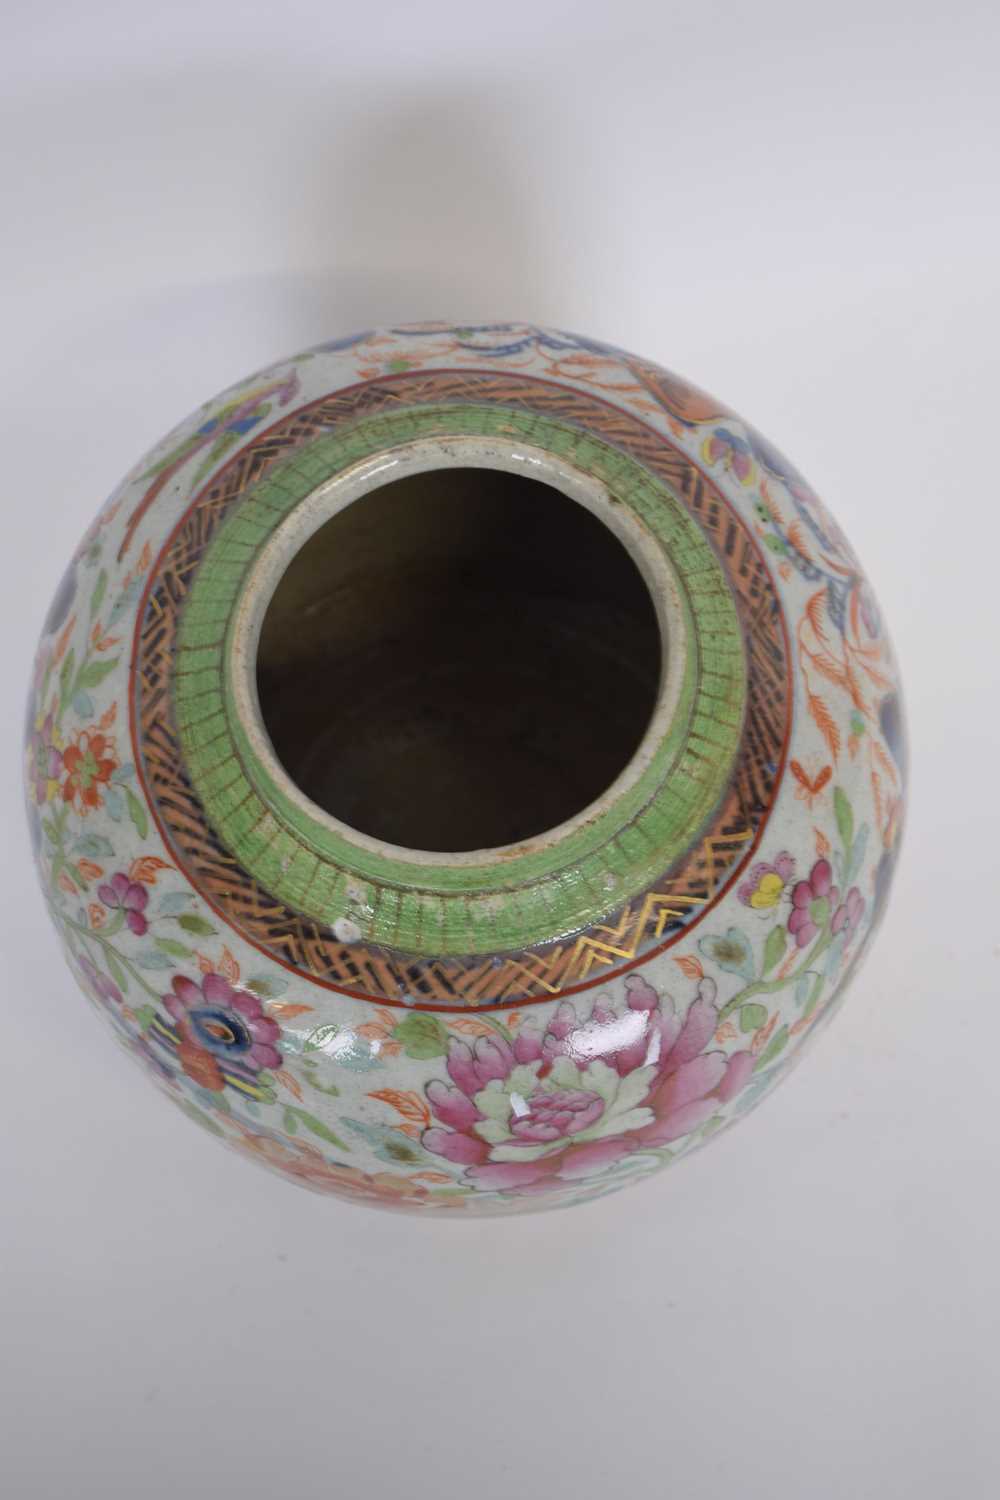 Late 18th/early 19th century Chinese porcelain ginger jar with overglaze European decoration - Image 5 of 6